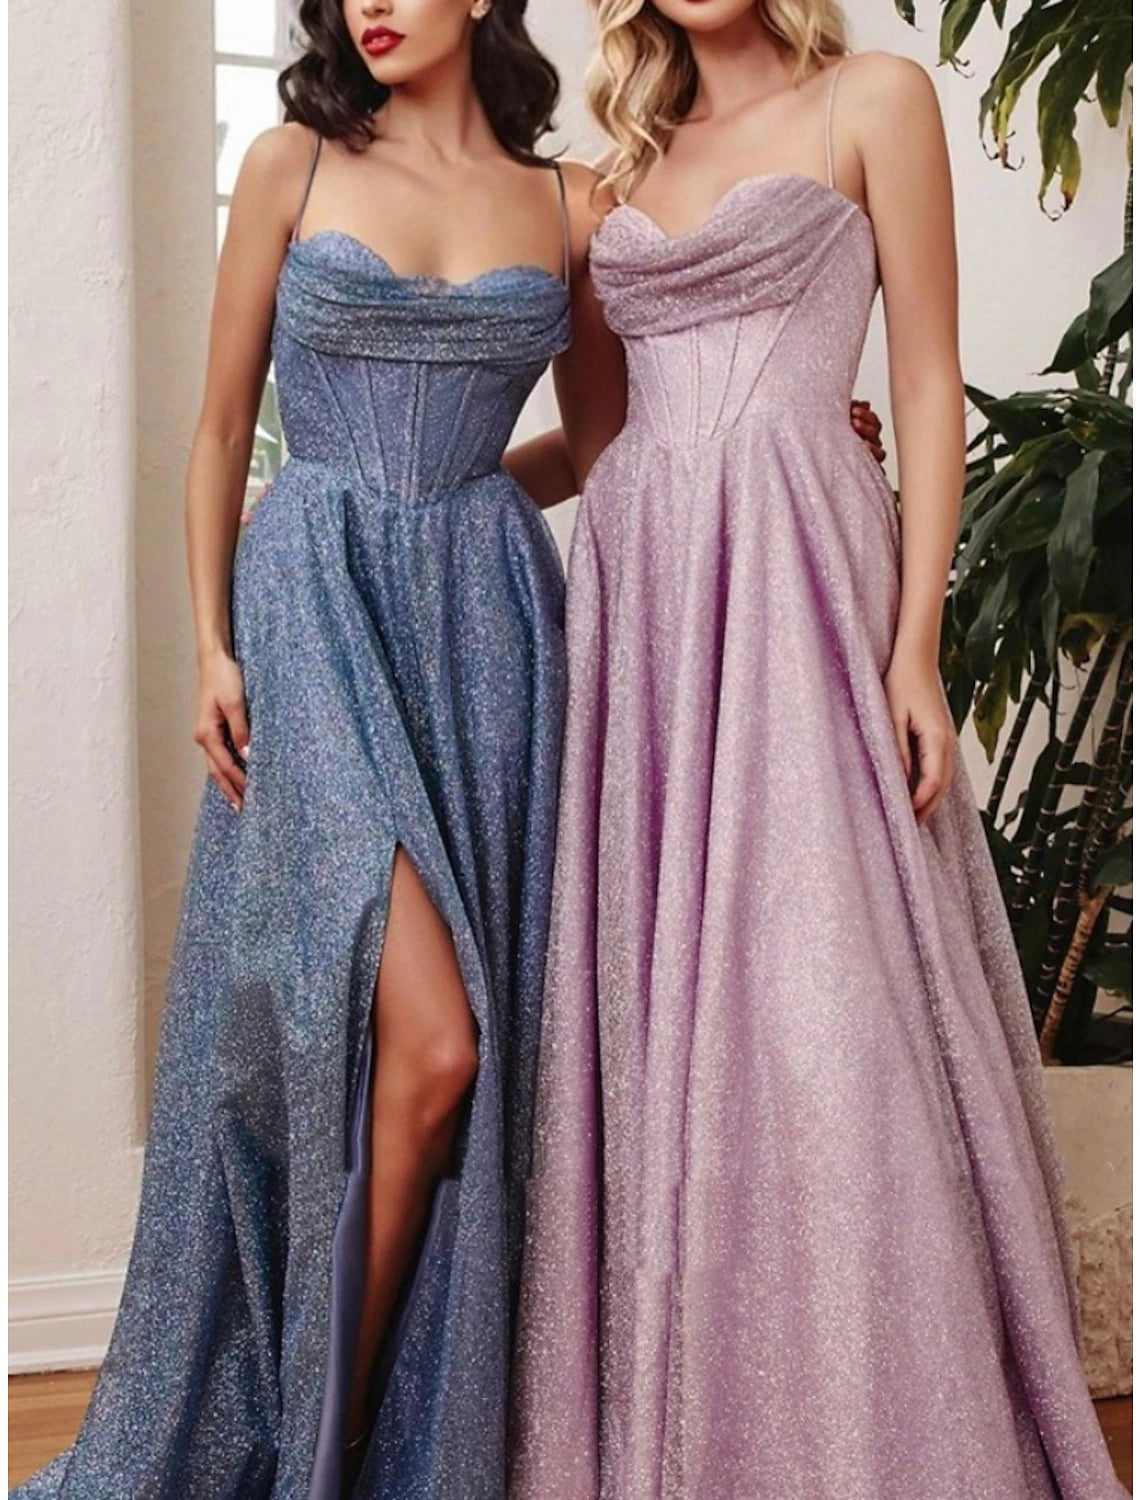 A-Line Evening Gown Elegant Dress Formal Court Train Sleeveless Spaghetti Strap Sequined with Glitter Pleats Ruched